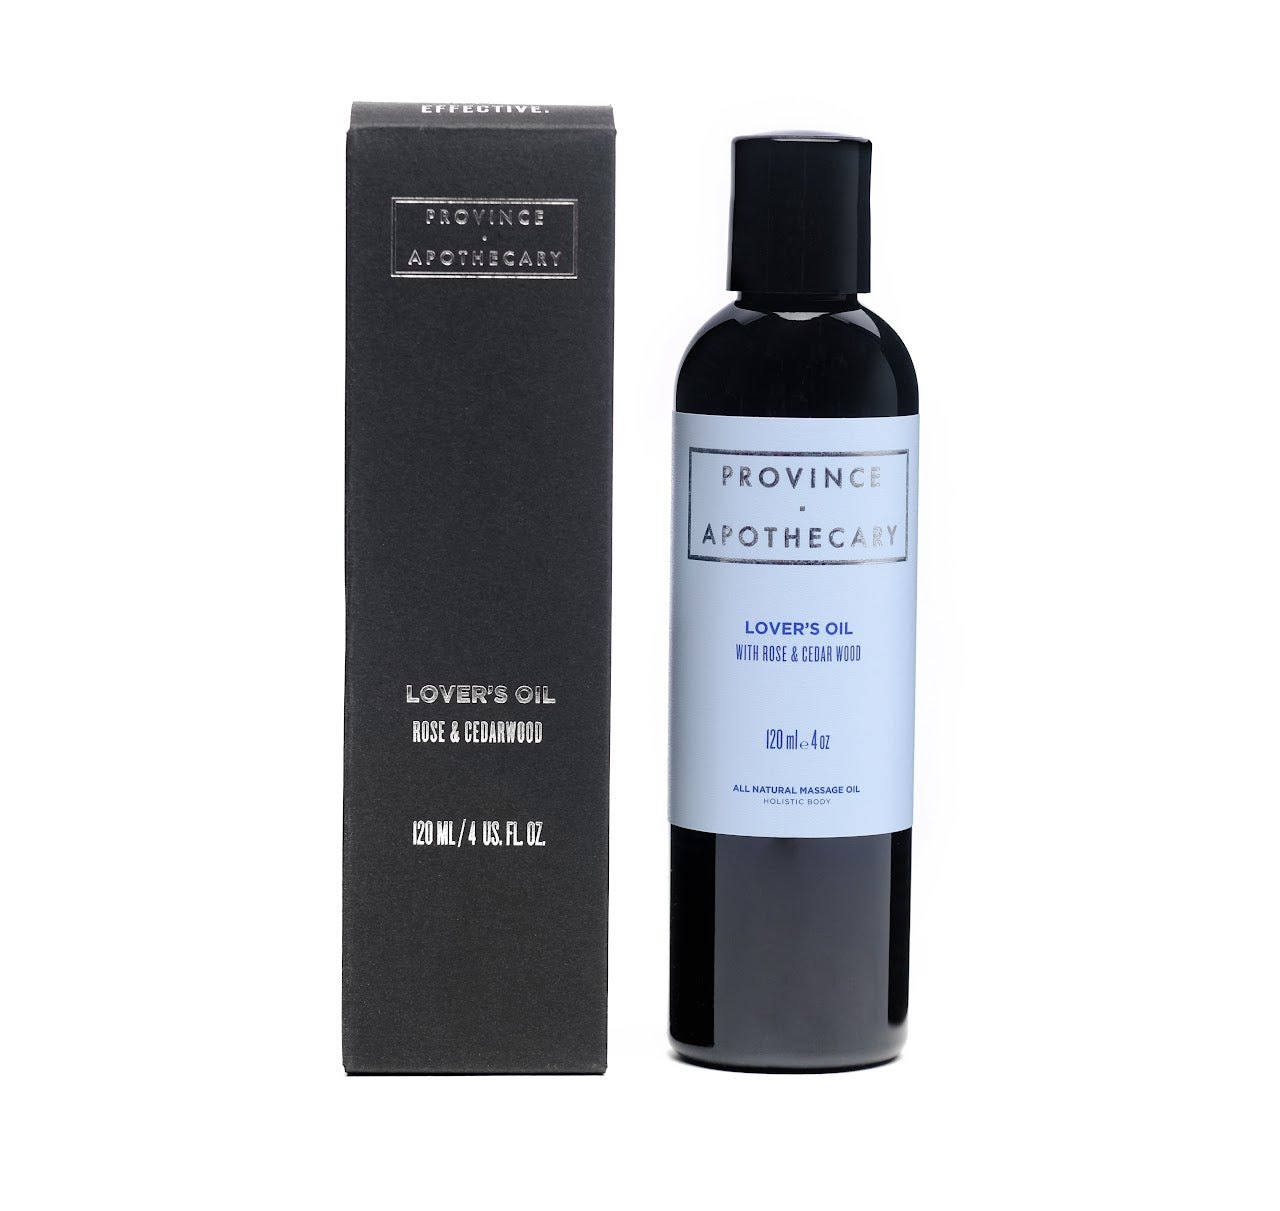 Province Apothecary Body Oil